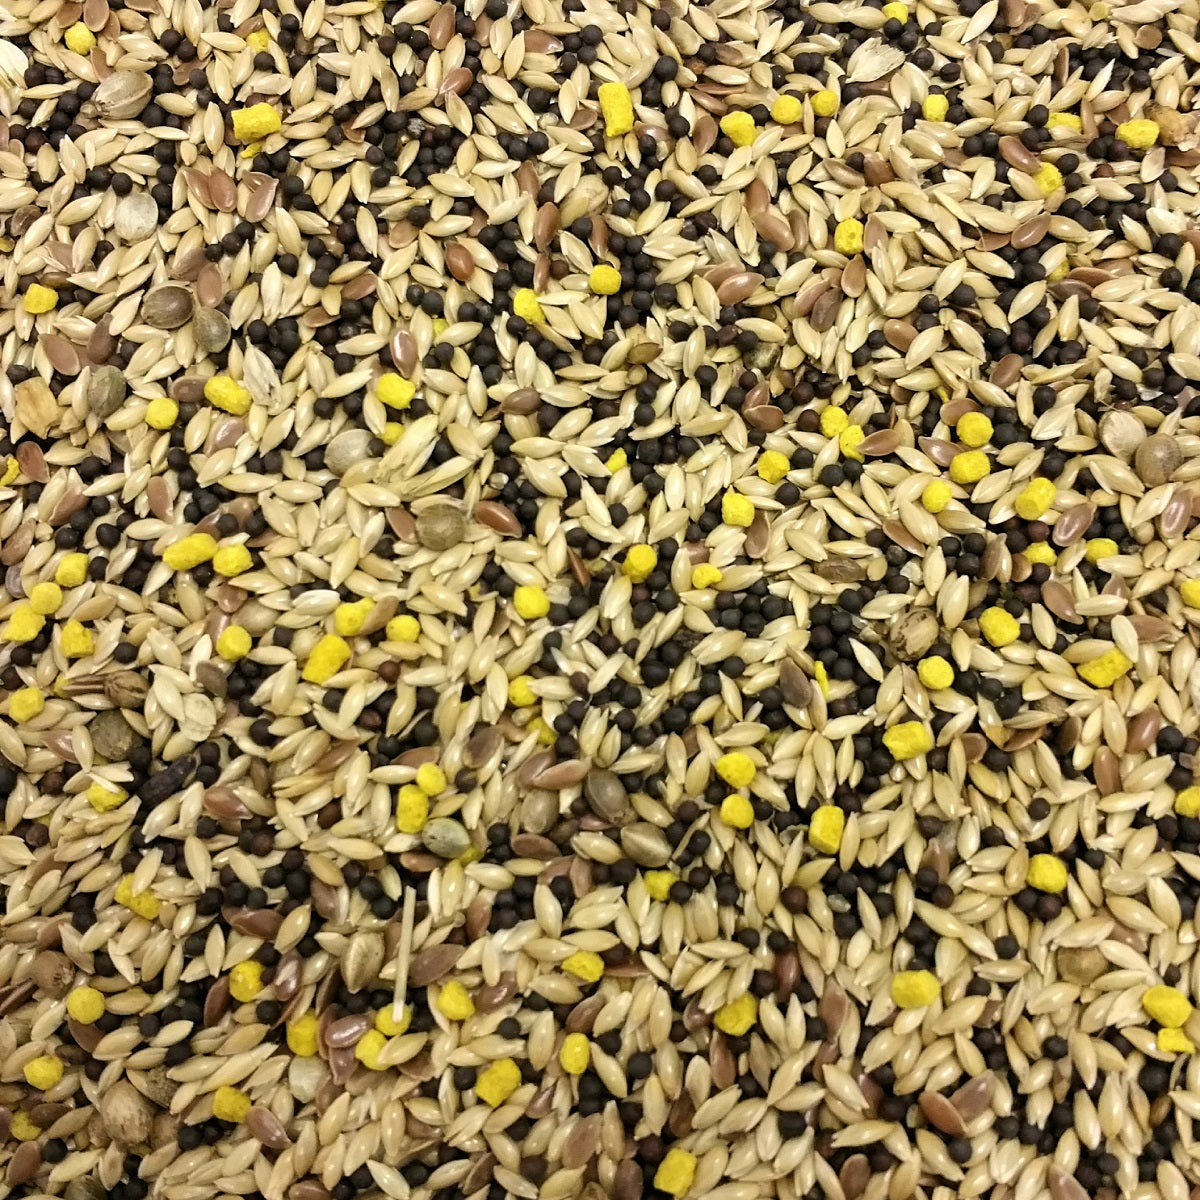 BestPets - Mixed Canary Seed